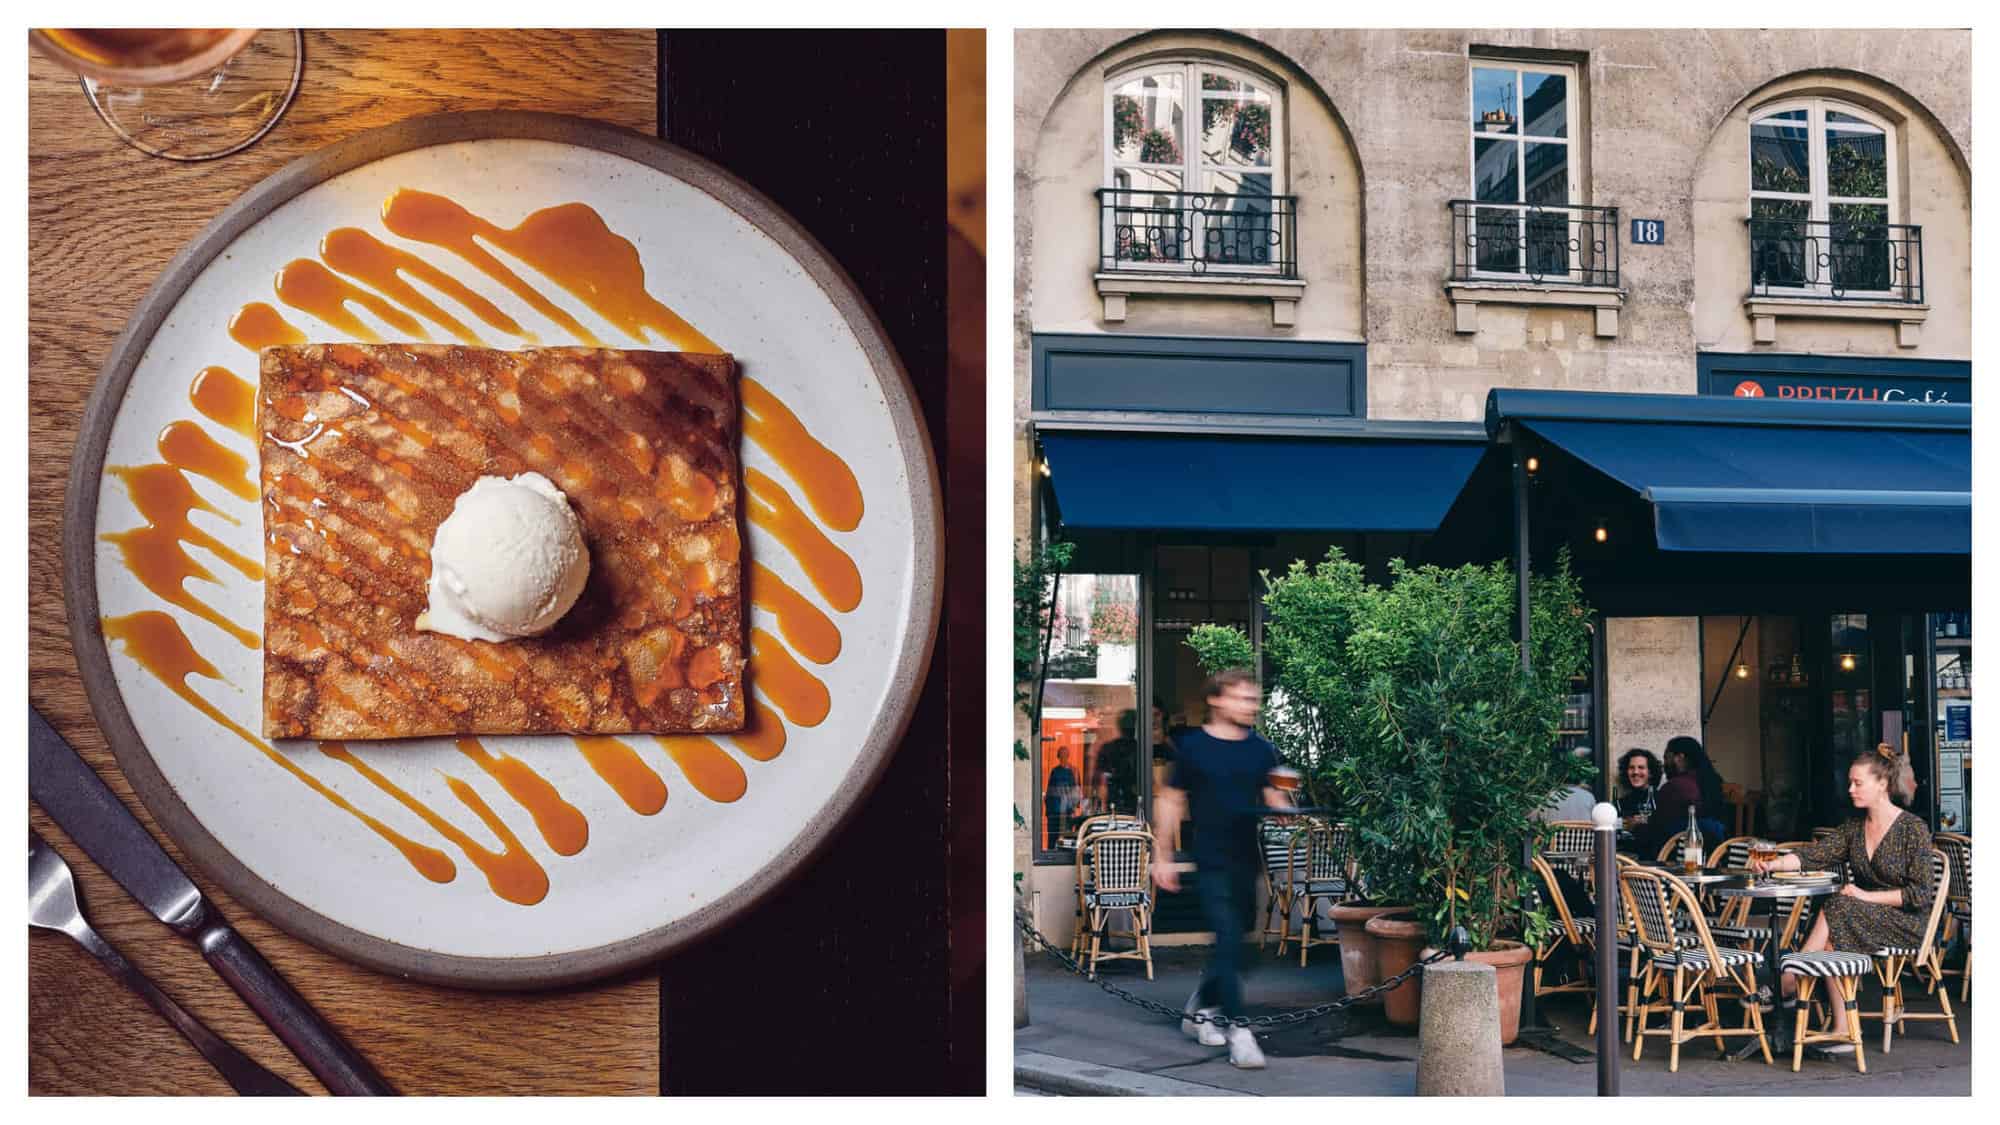 Left: a caramel crepe on a wooden table at BREIZH Cafe. Right: the terrasse of BREIZH Cafe in Paris.